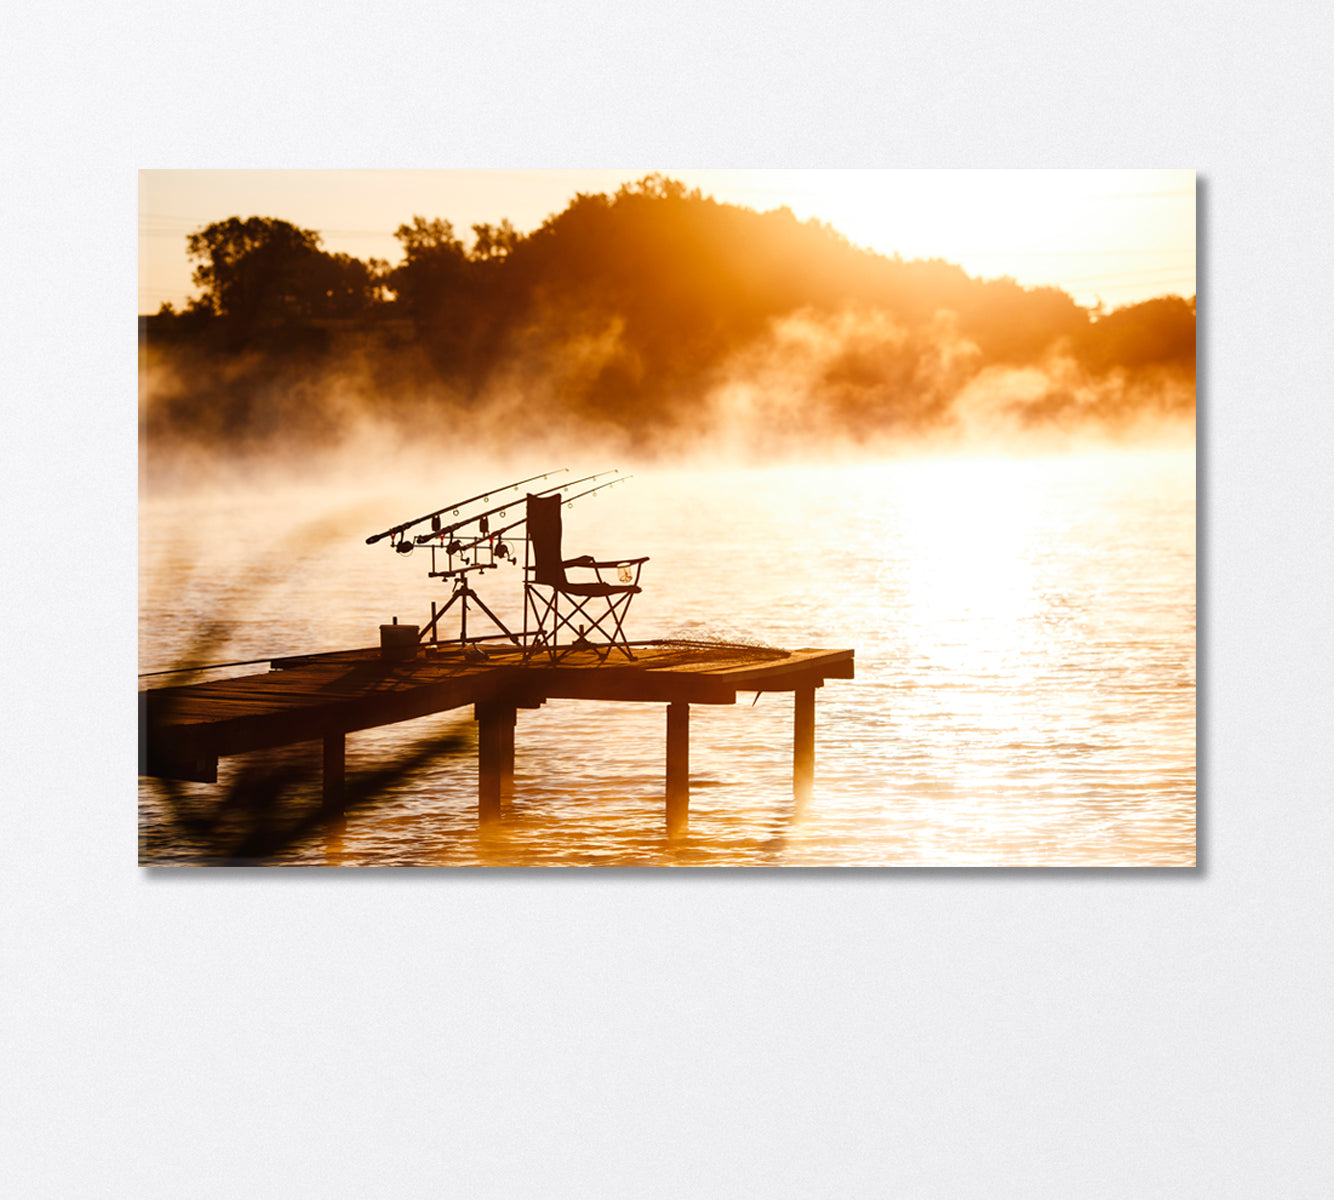 Fishing Equipment with Seat on Lake Canvas Print-Canvas Print-CetArt-1 Panel-24x16 inches-CetArt